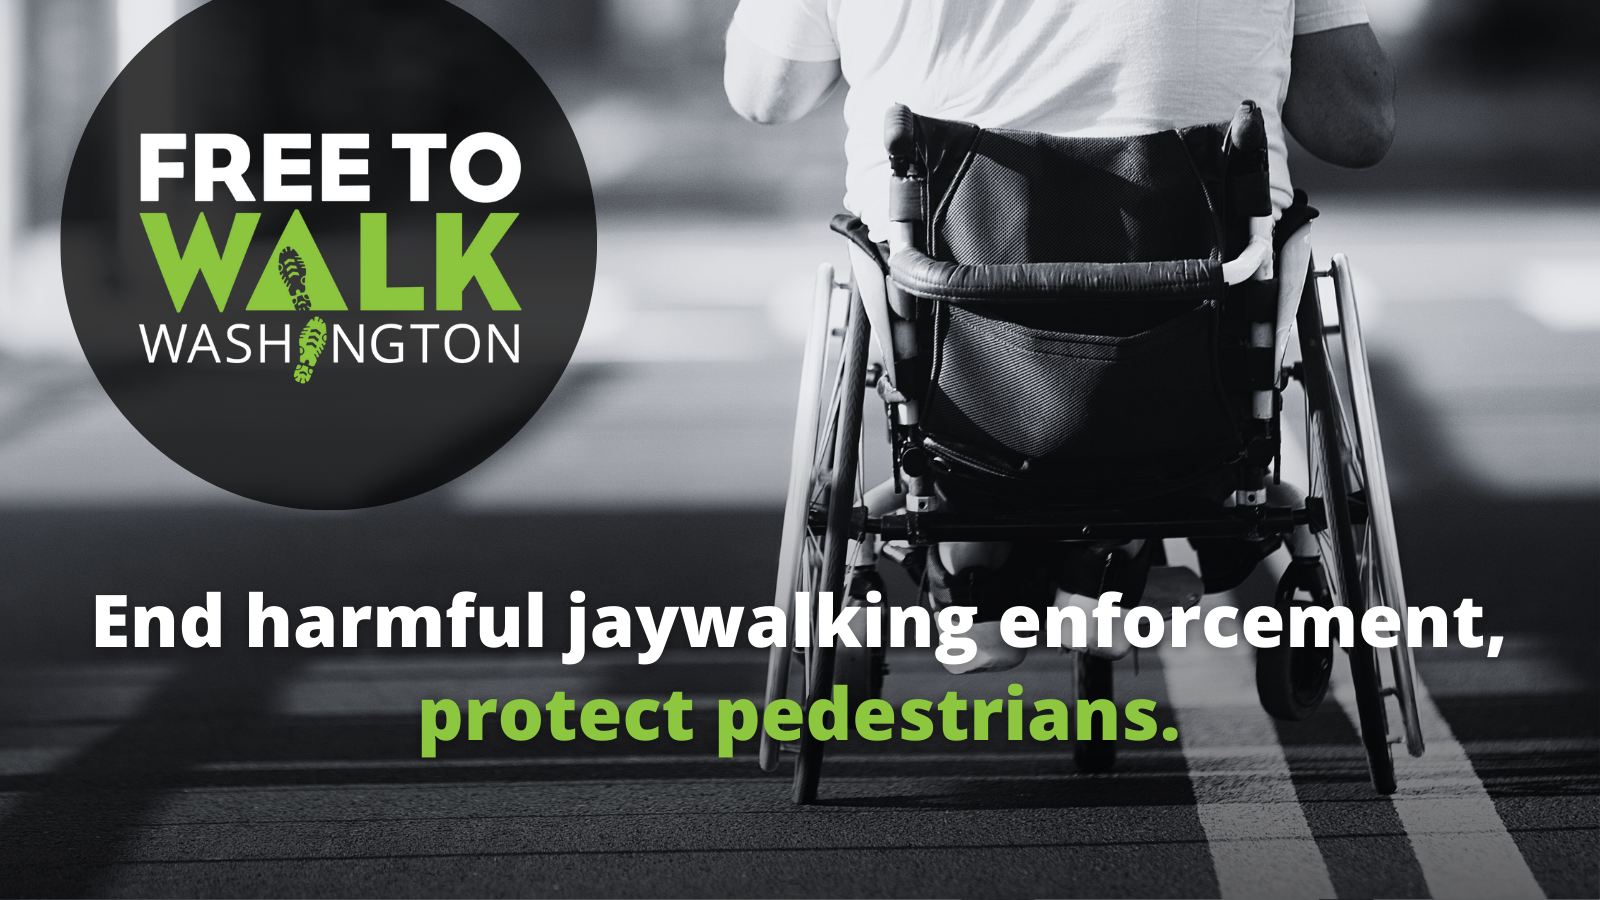 Photo of a person in a wheelchair crossing the street with Free to Walk Washington logo overlaid. Text: End harmful jaywalking enforcement, protect pedestrians.